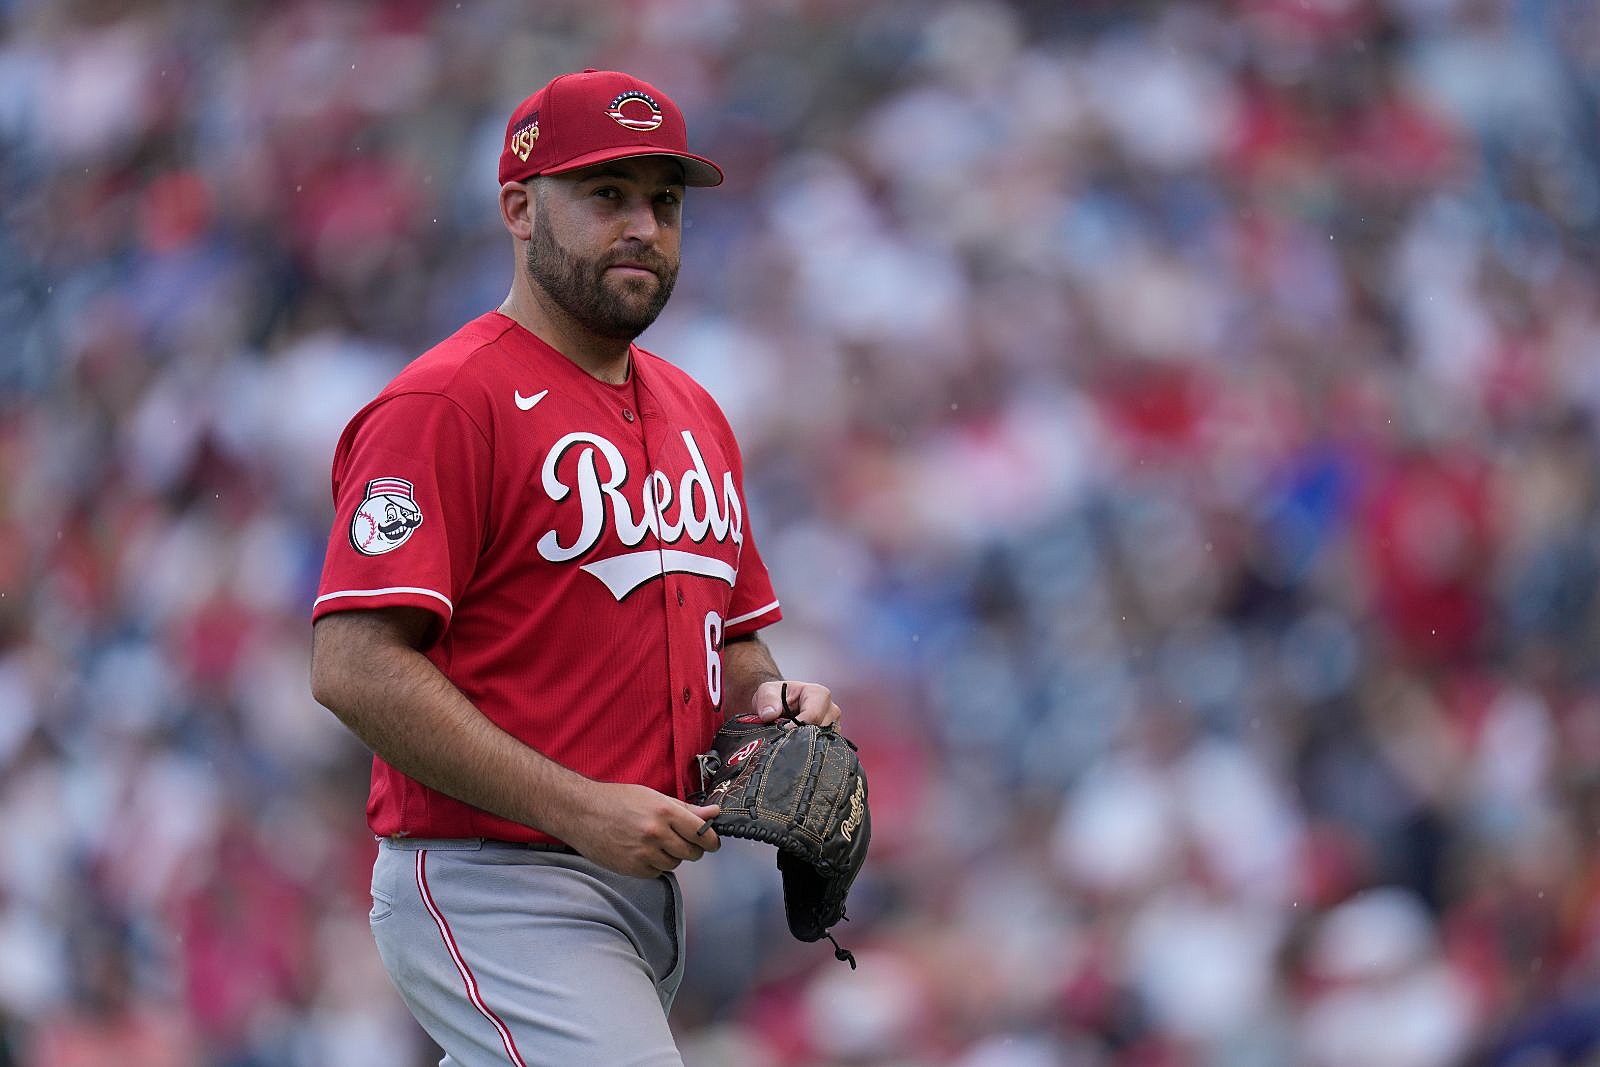 Kennedy wins in major league return as Reds beat Nationals